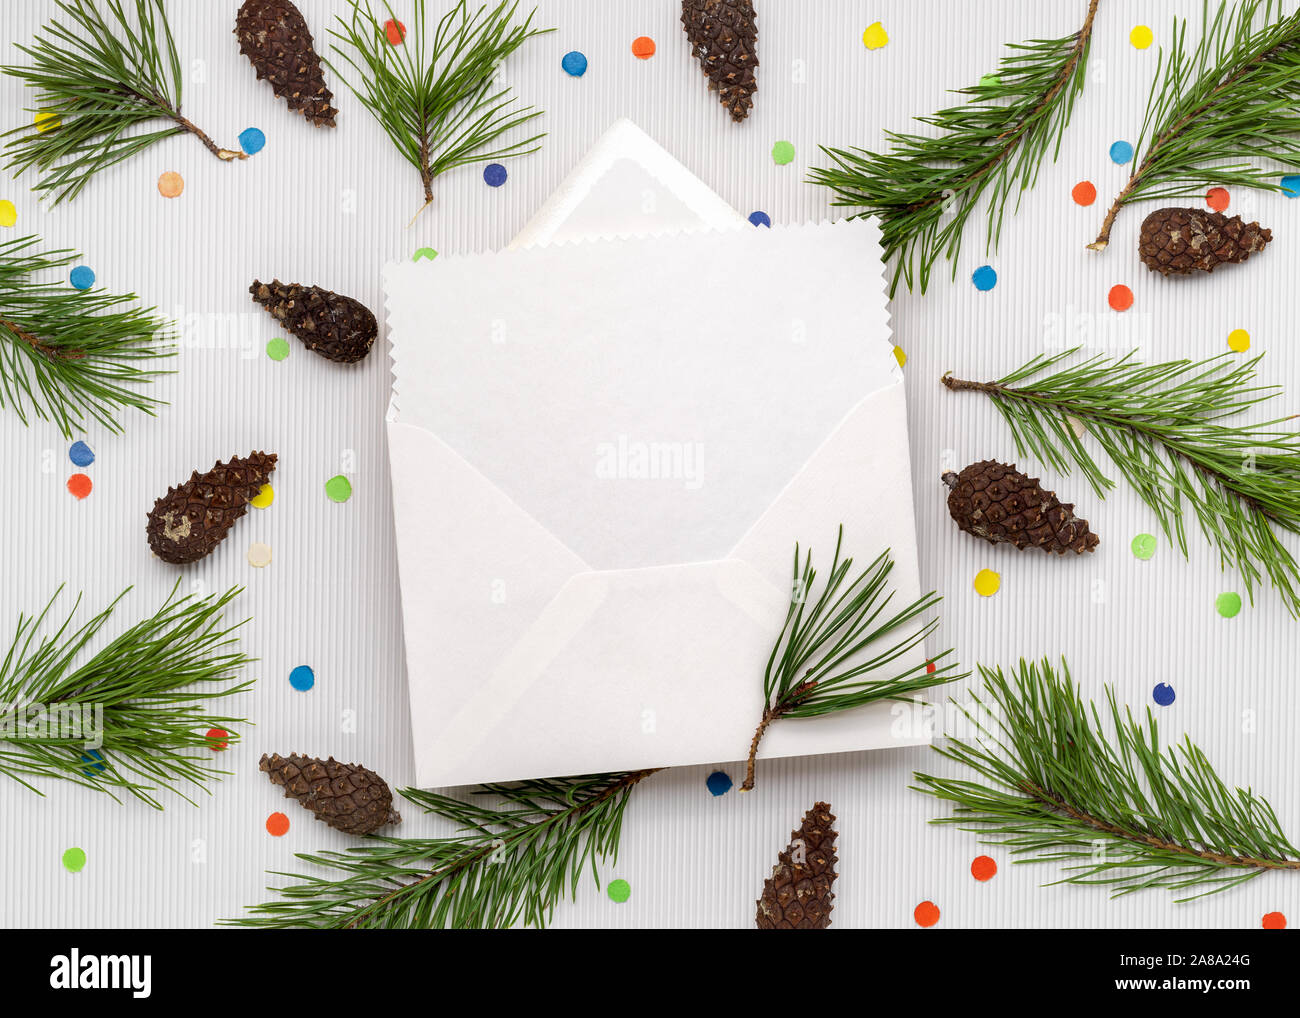 Christmas Greeting Card Letter. White paper sheet with copy space for text. Decor from pine branches and festive confetti Stock Photo